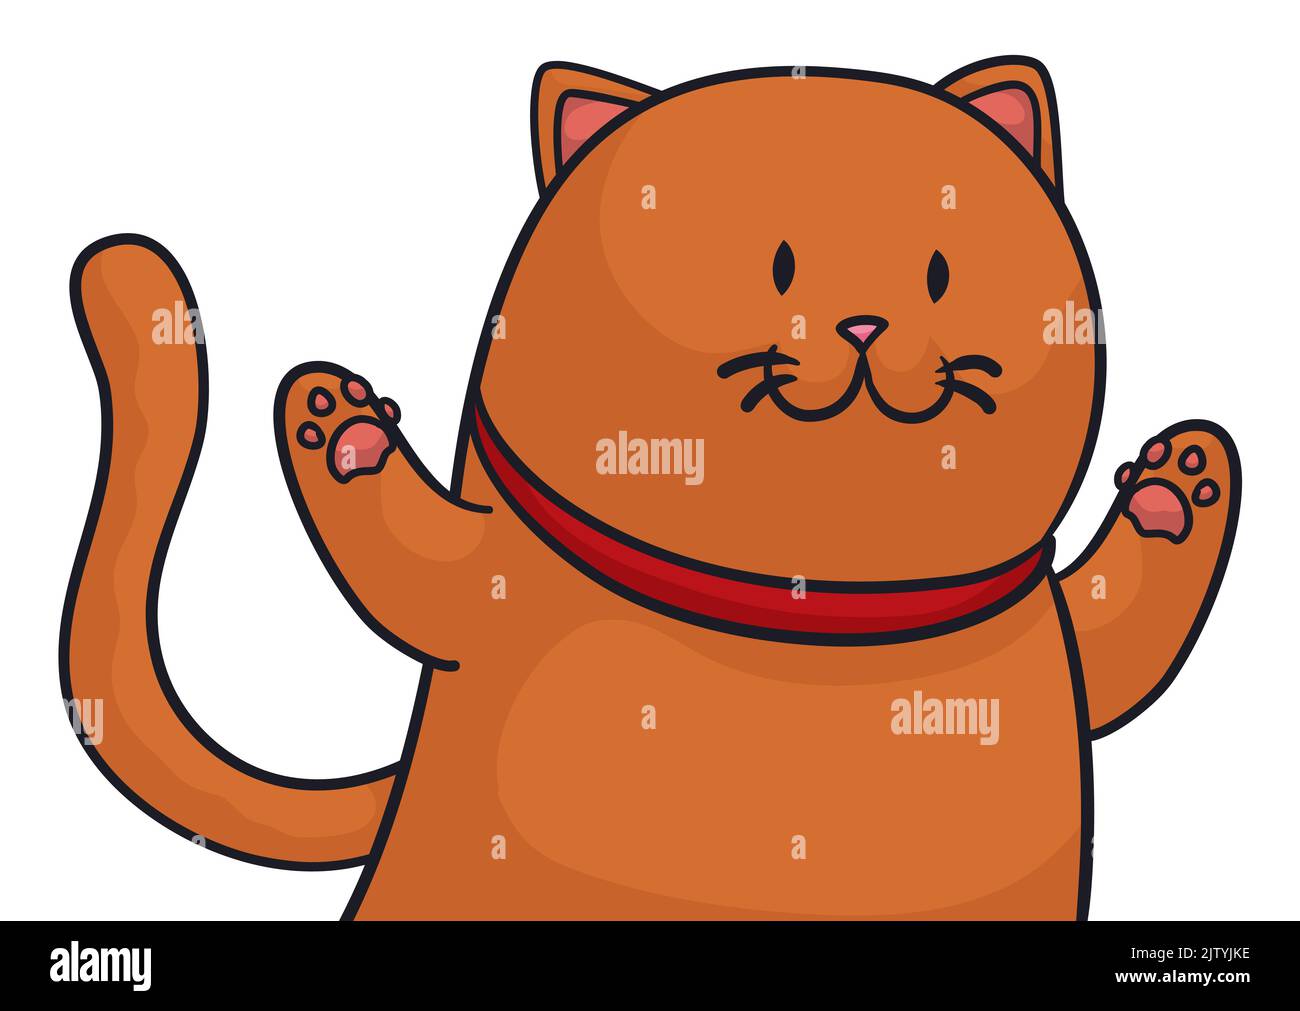 Affectionate cat with orange fur, red collar and open arms welcoming to you. Stock Vector